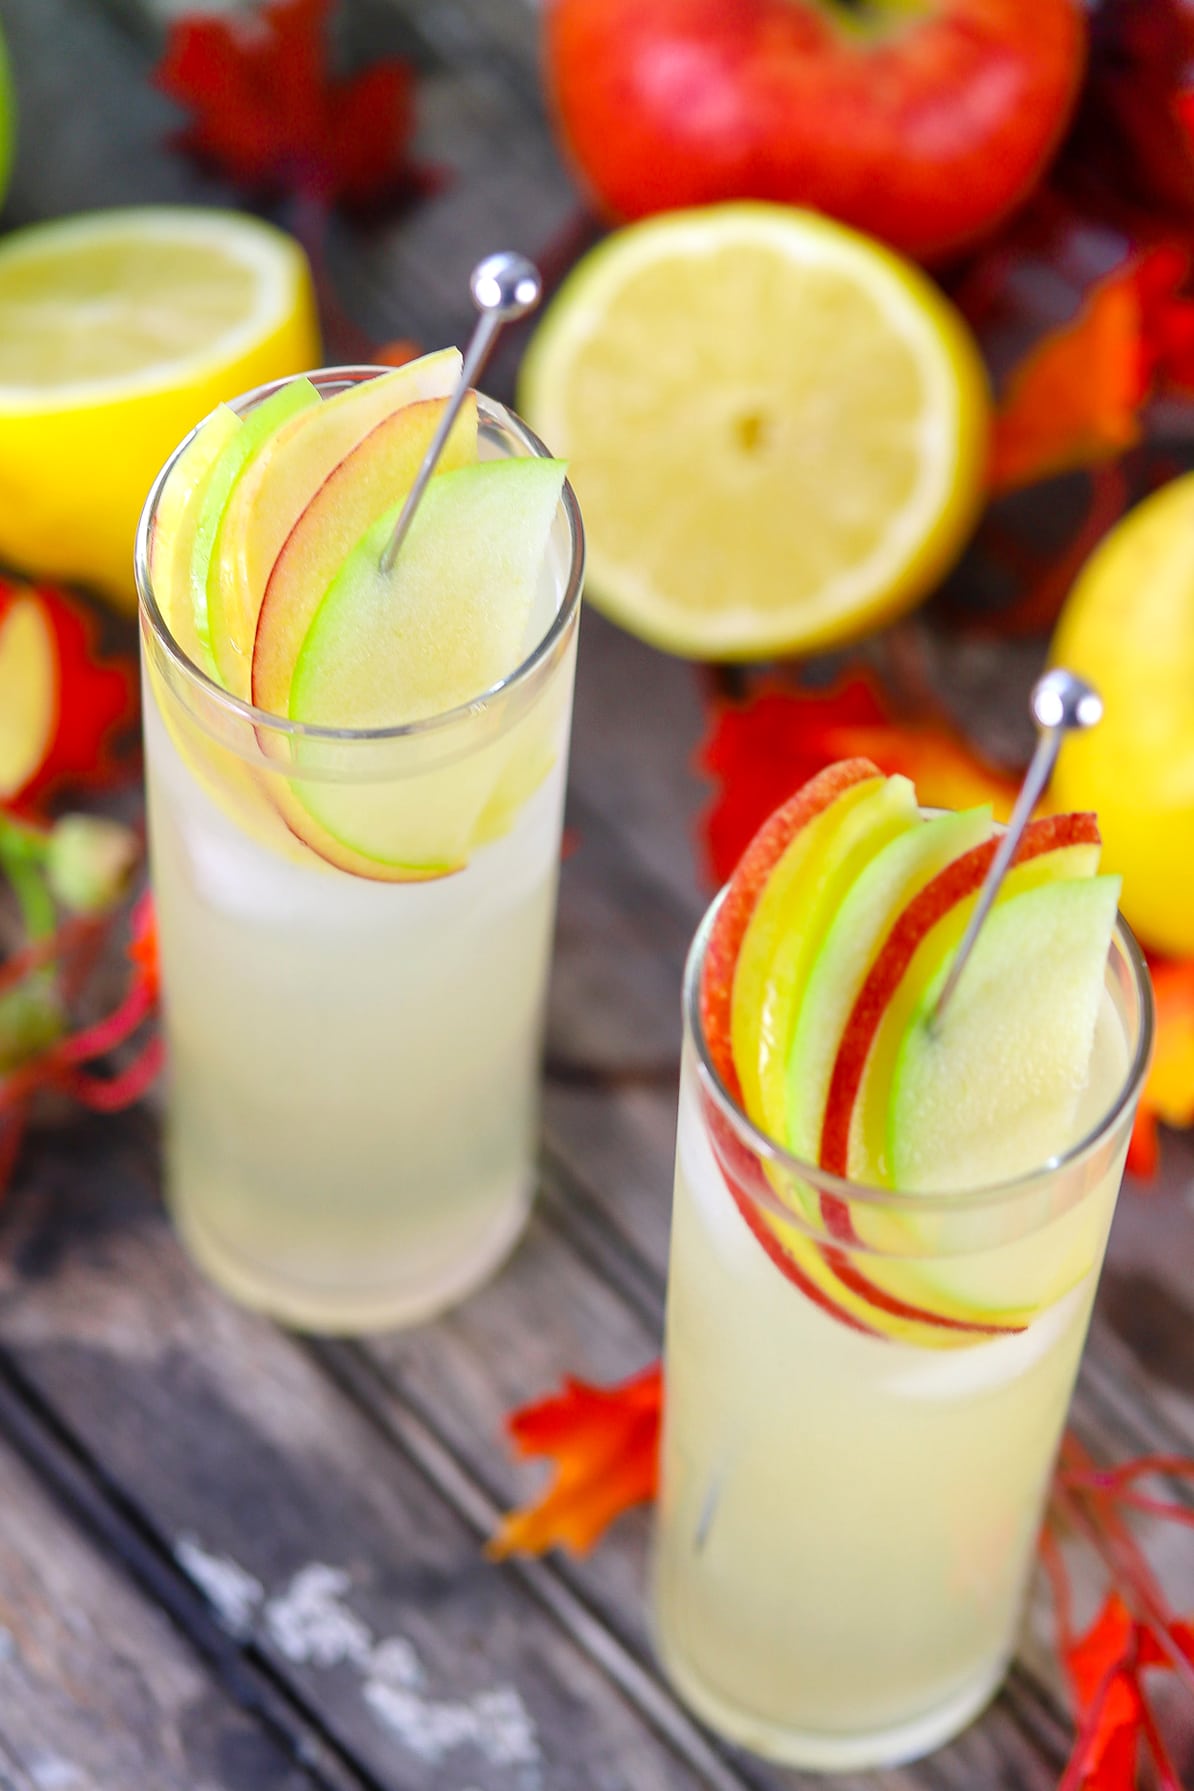 Hard lemonade in glass garnished with apple slices on a stainless steel drink stirrer